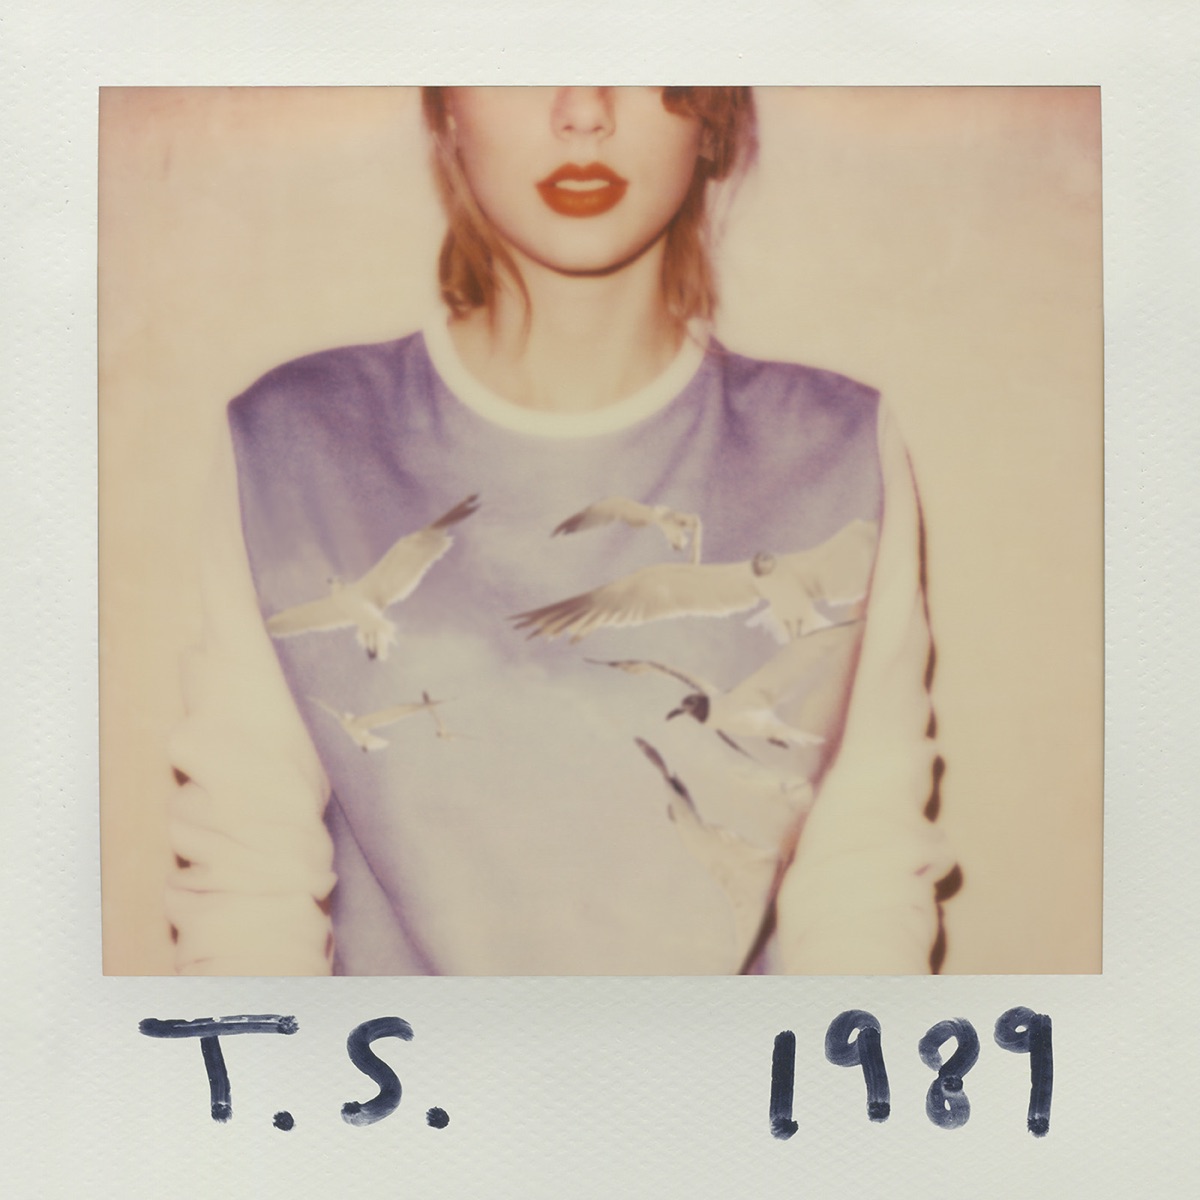 1989 Album Cover By Taylor Swift